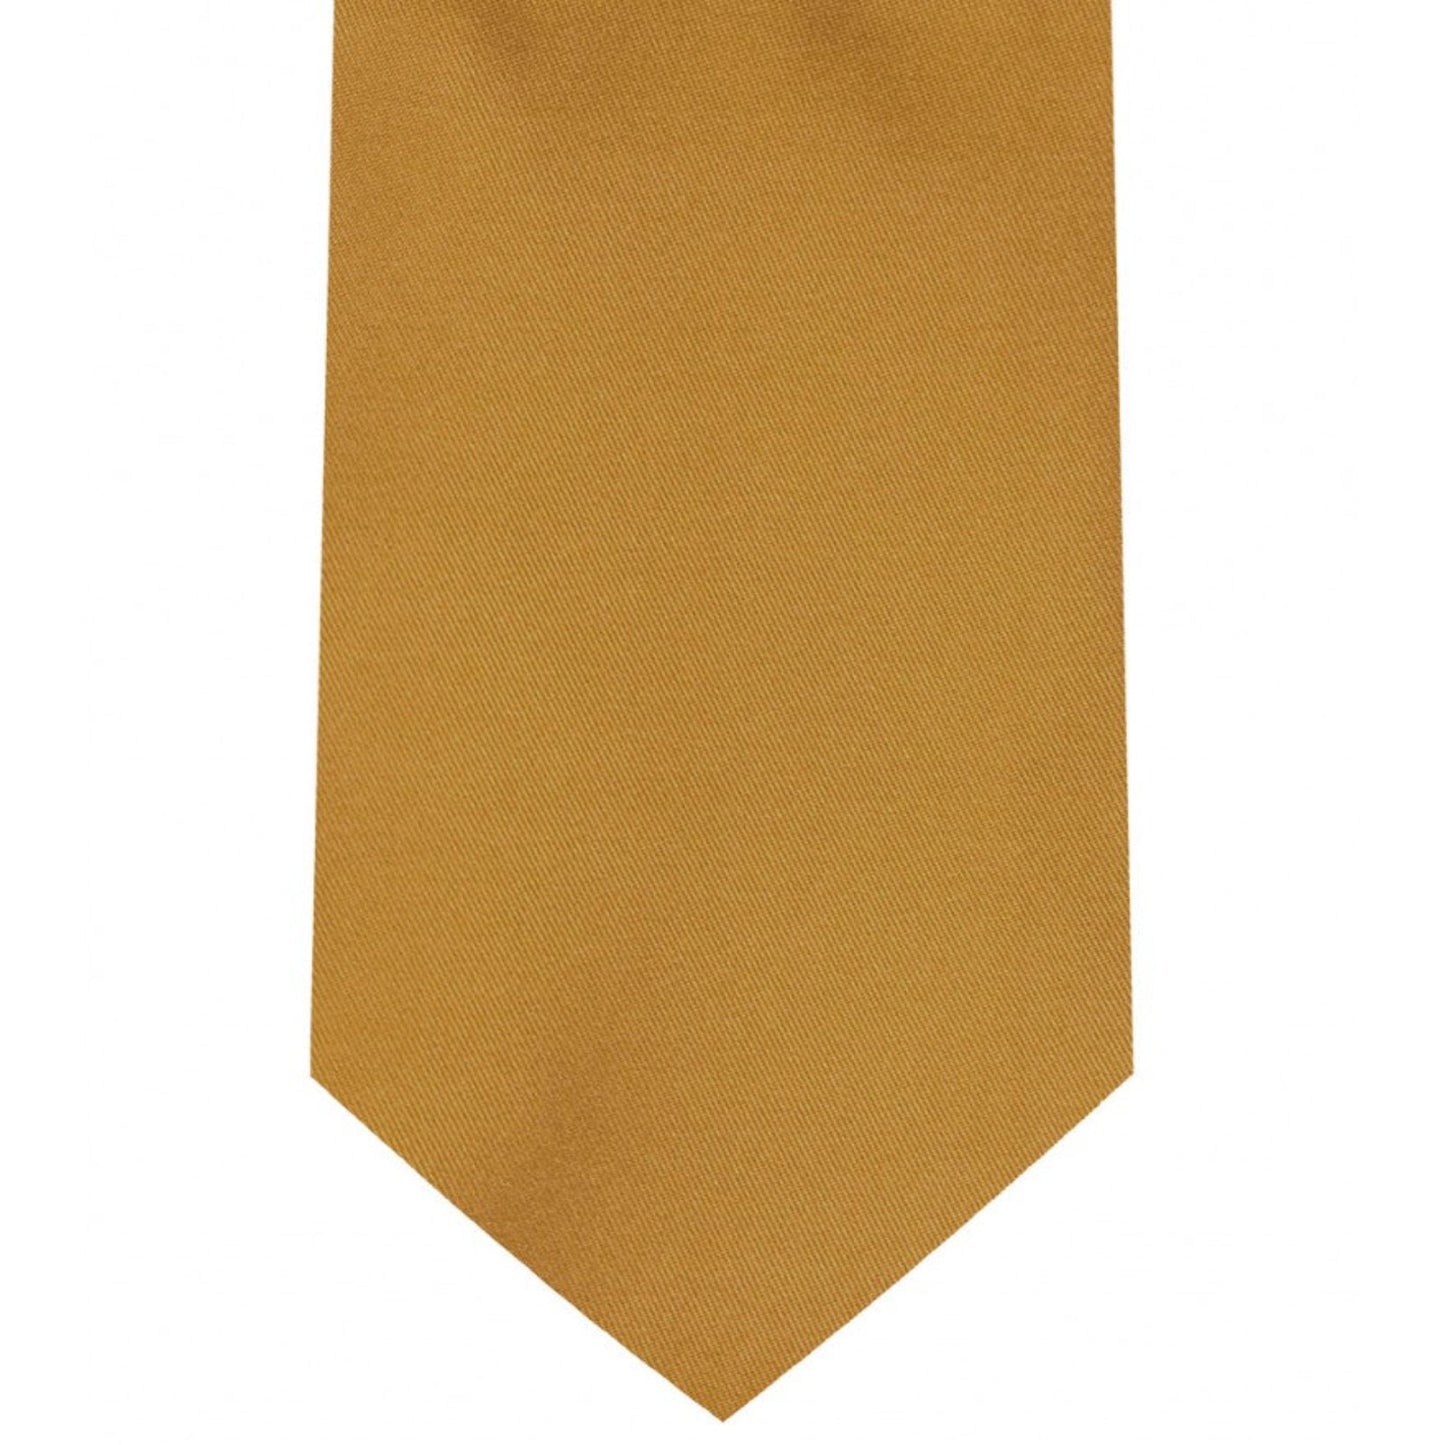 Classic Rust Tie Regular width 3.5 inches With Matching Pocket Square | KCT Menswear